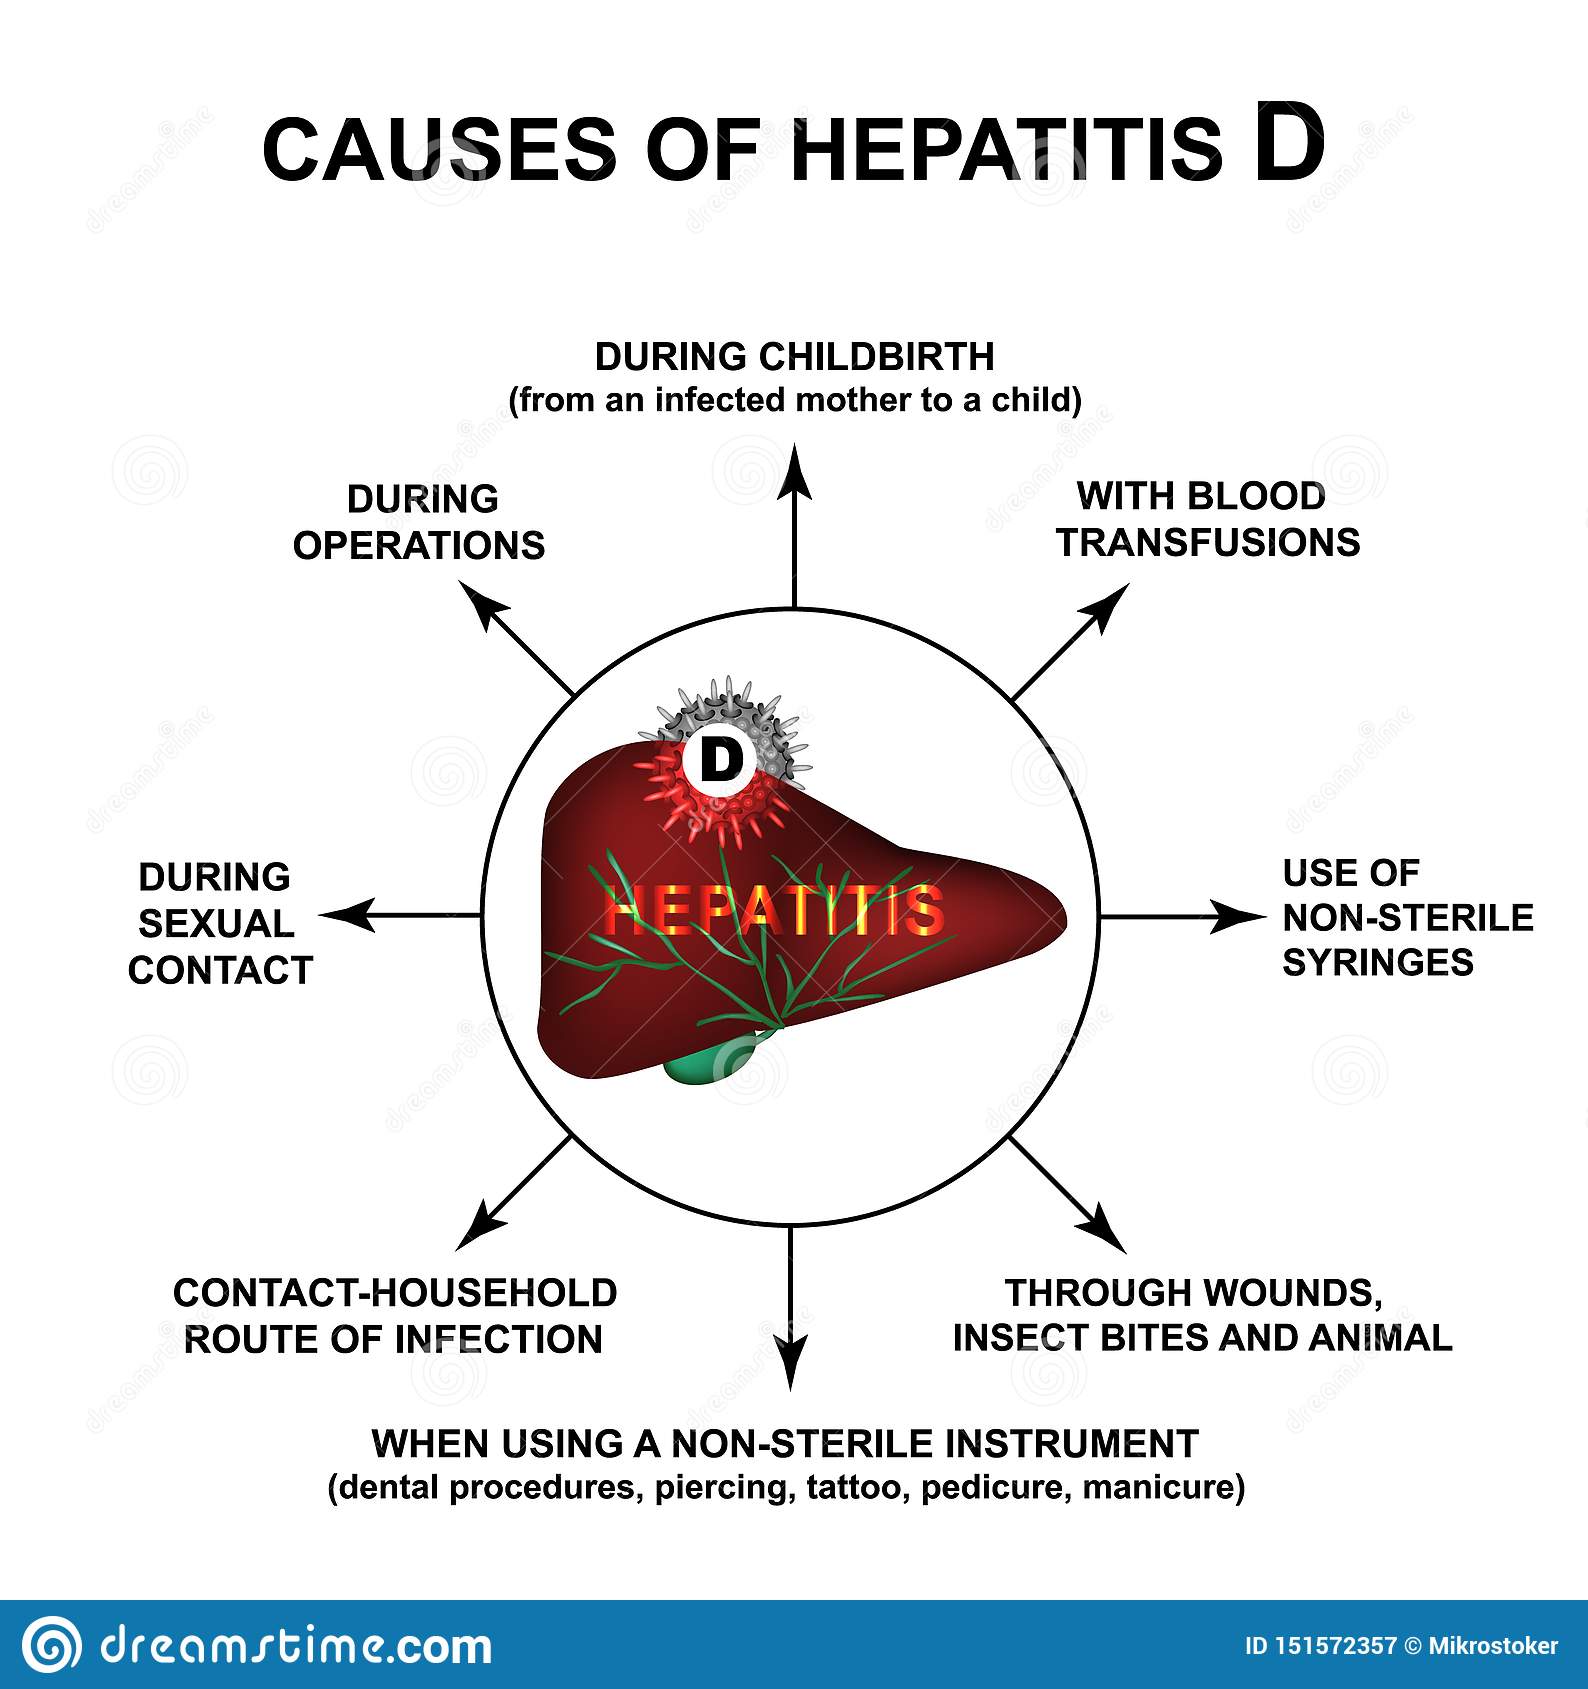 What Are The Causes Of Hepatitis D